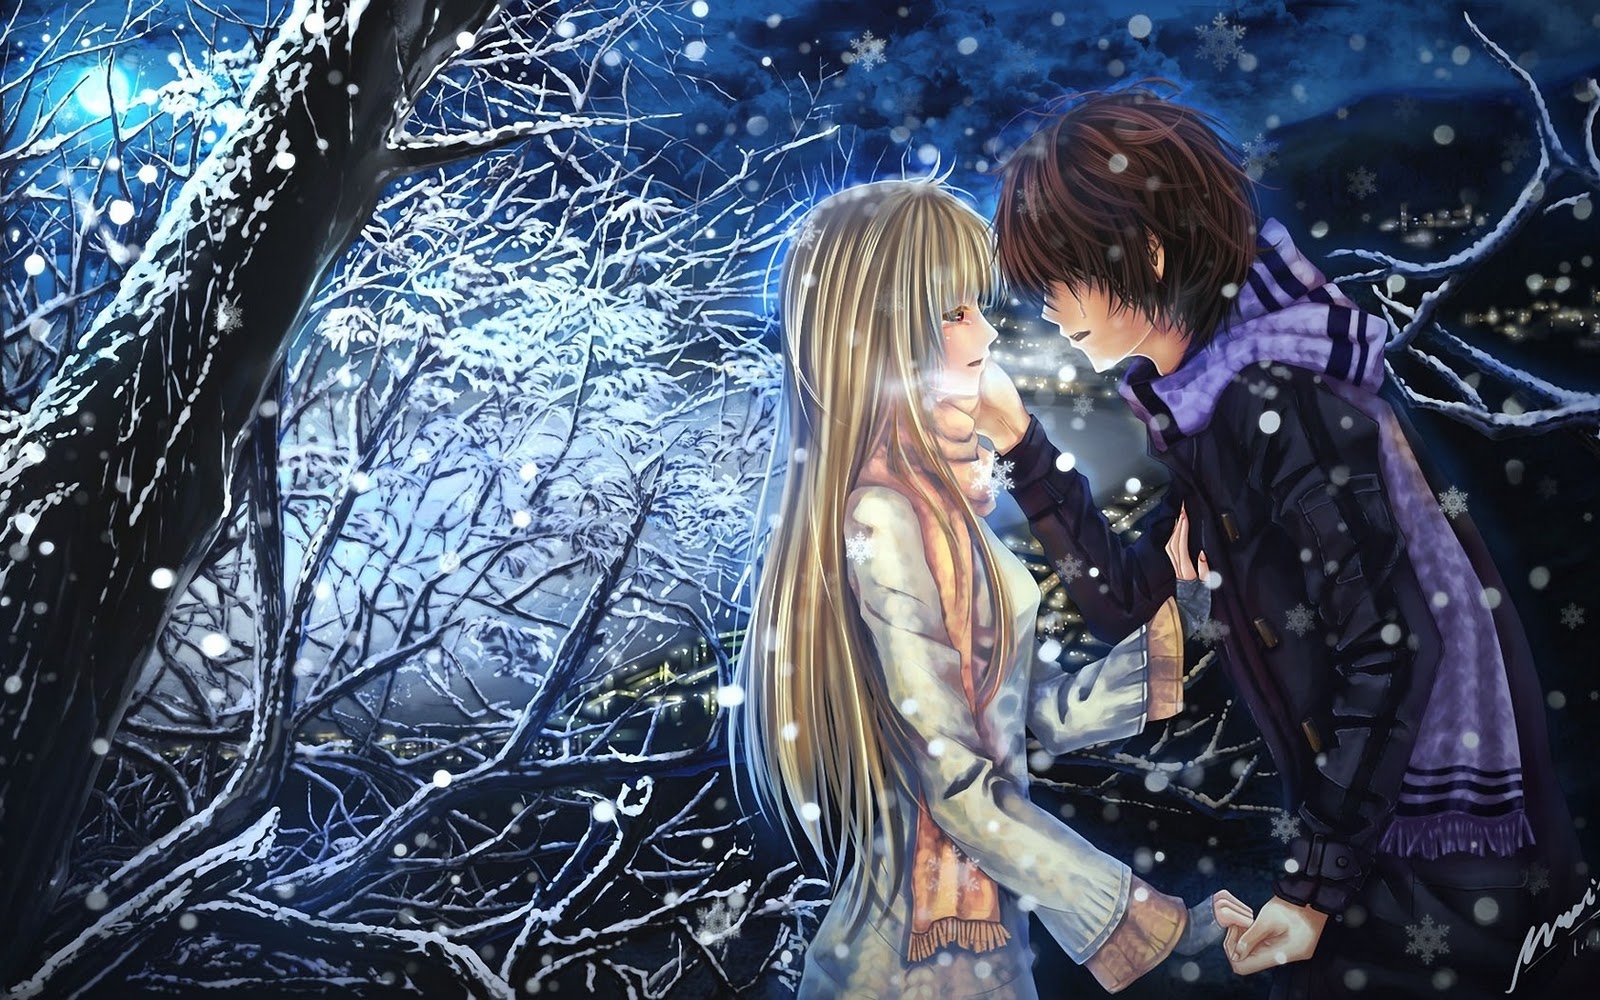 Anime Xmas Couples Wallpapers